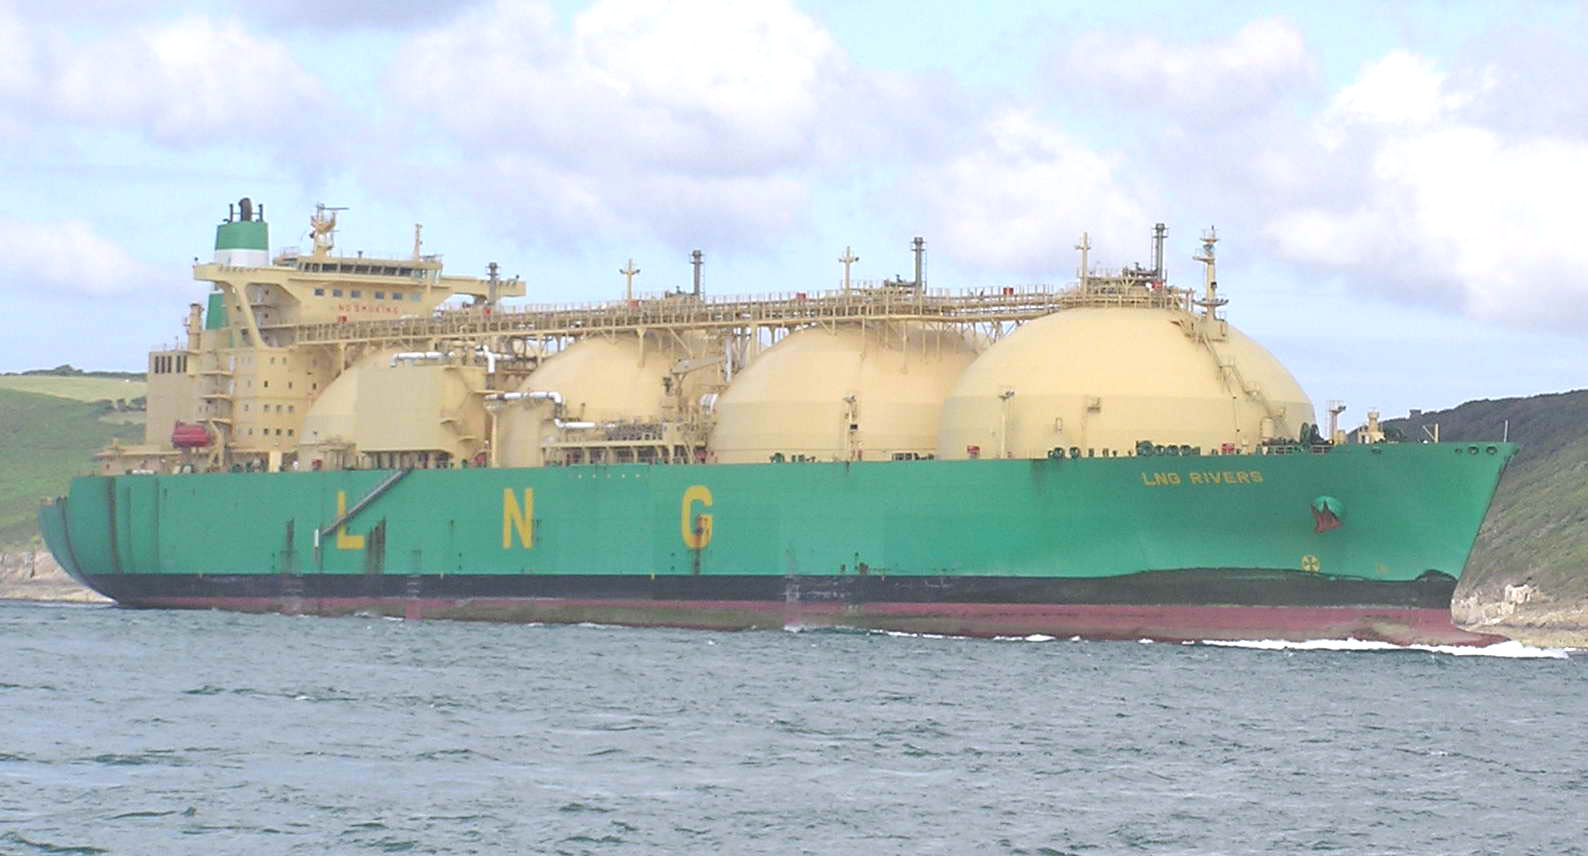 Pavilion Energy: naval LNG demand seen by at 30 million tons in 2030